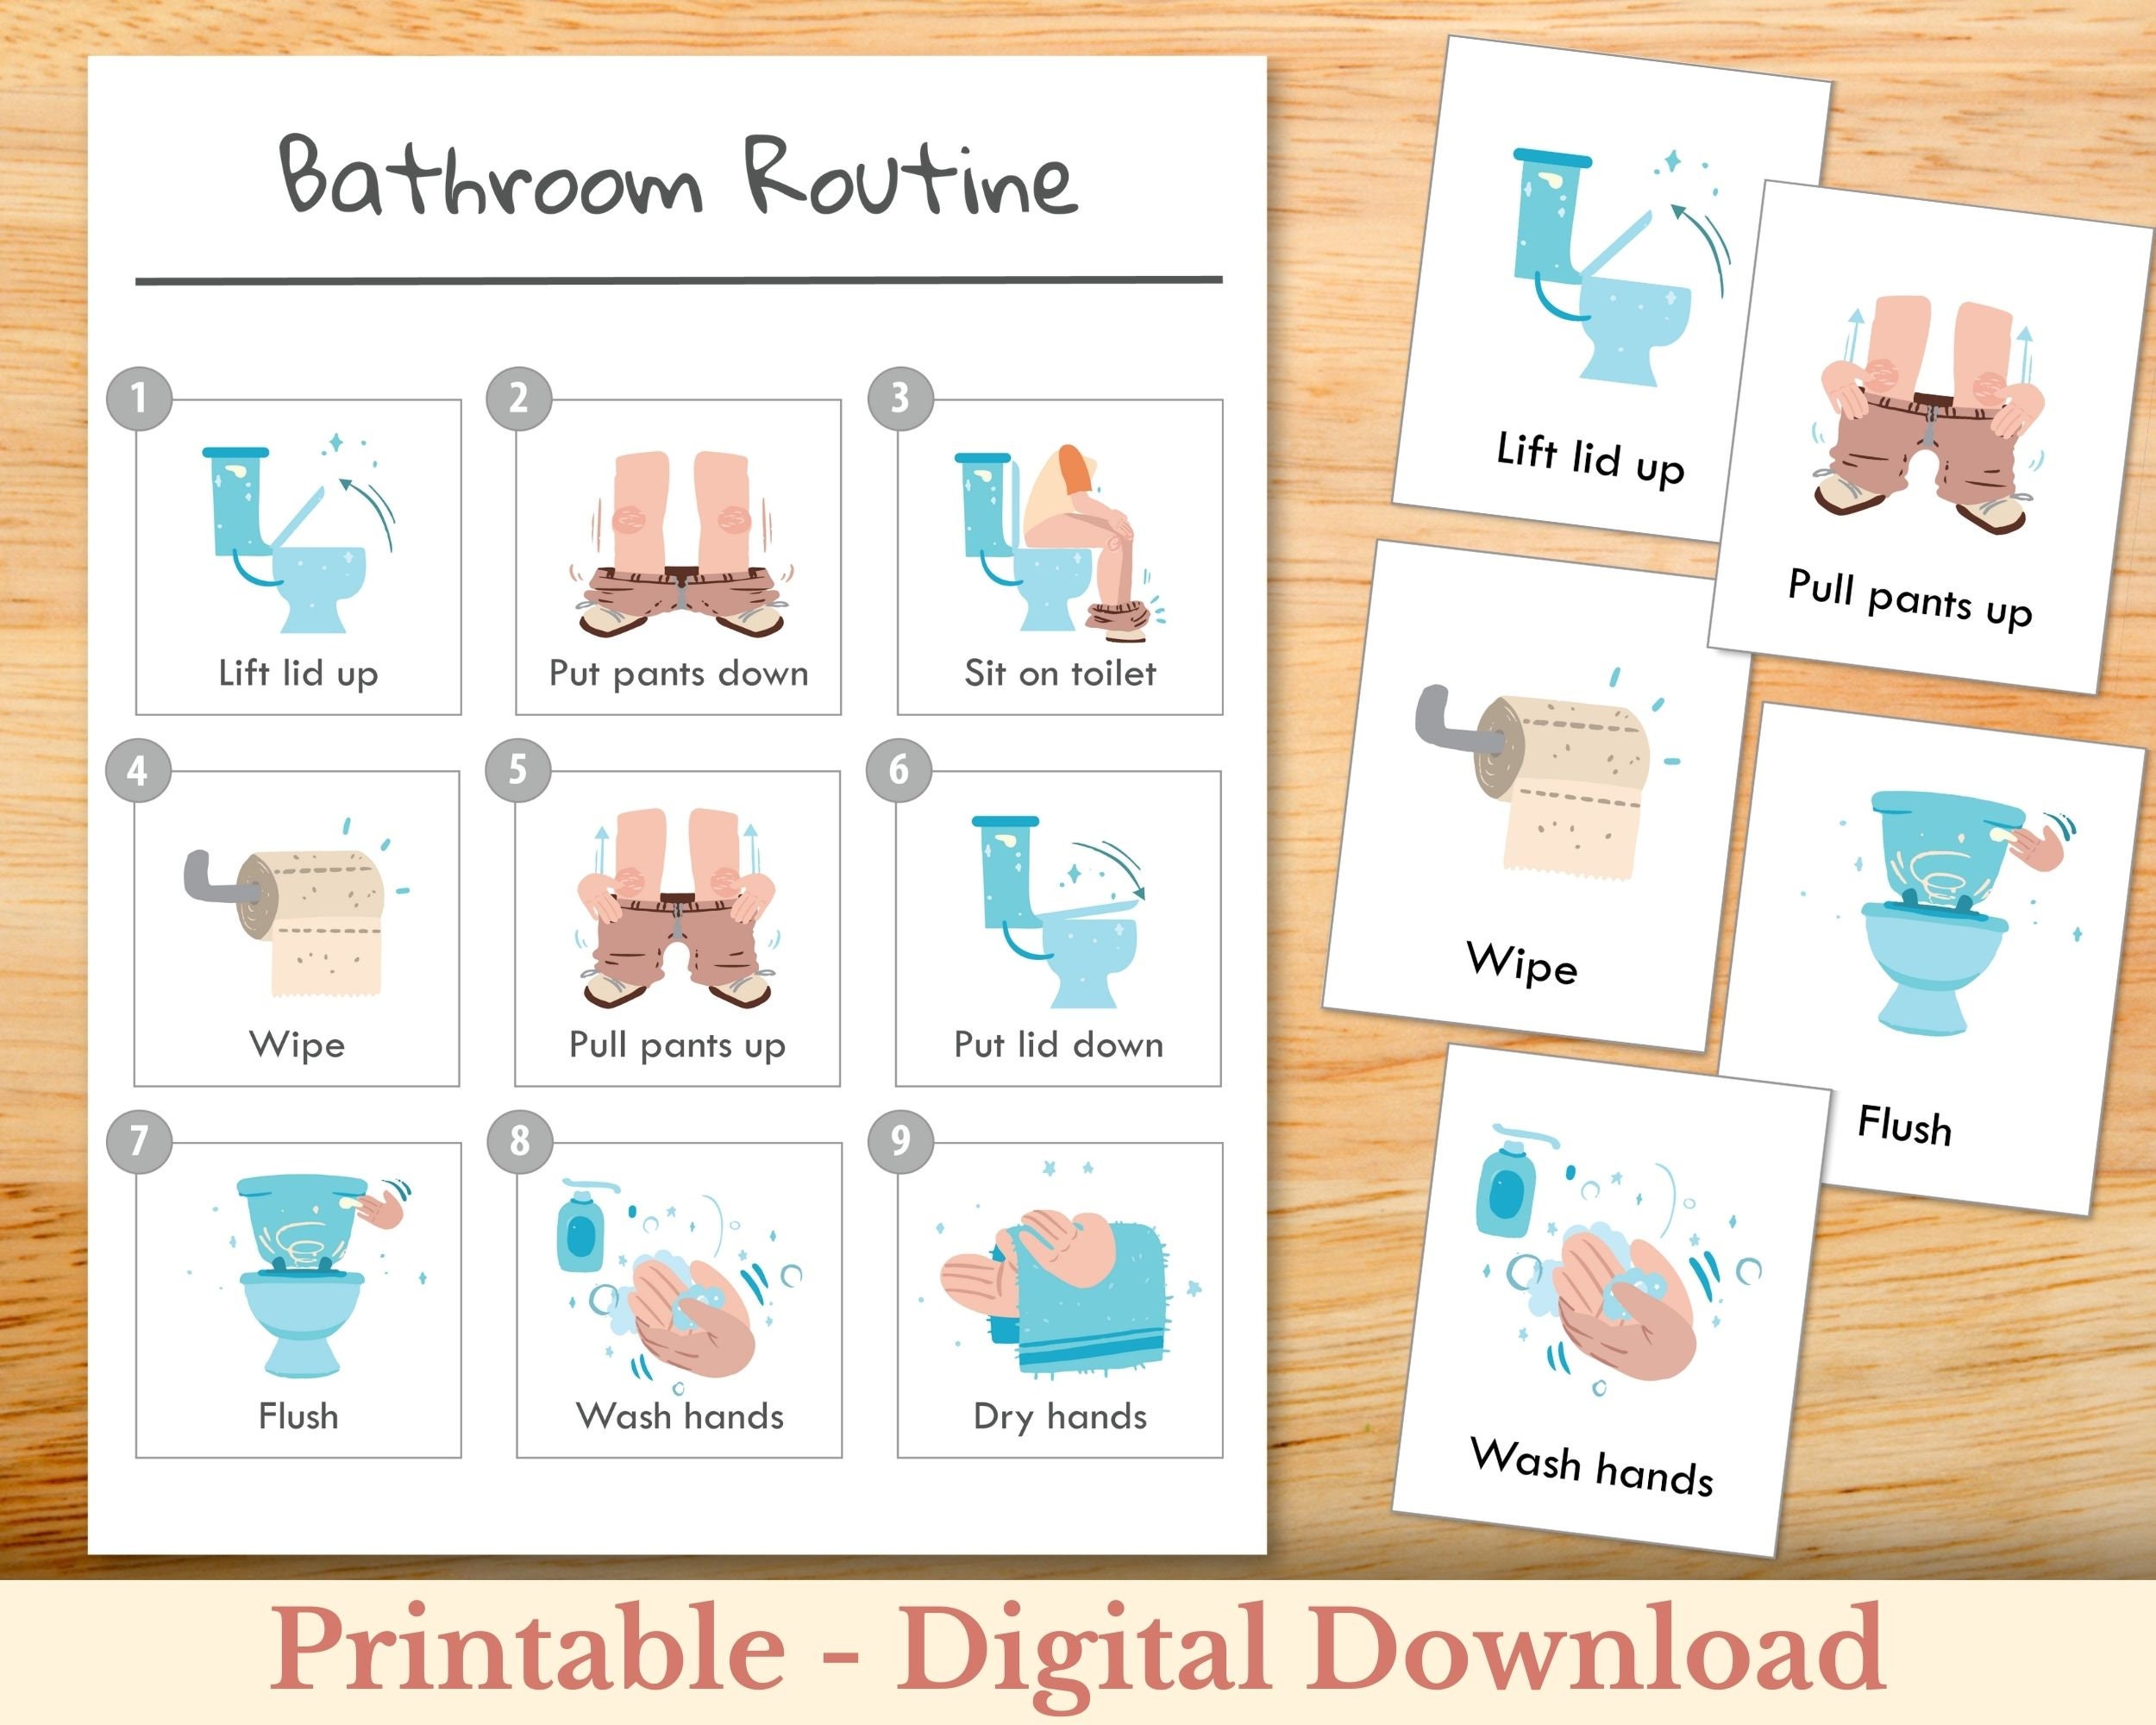 DIY Printable Download, Autism PECS, Visual Schedule Hygiene Routine for  Kids-potty Training and Hand Washing Chart for Boys -  Finland